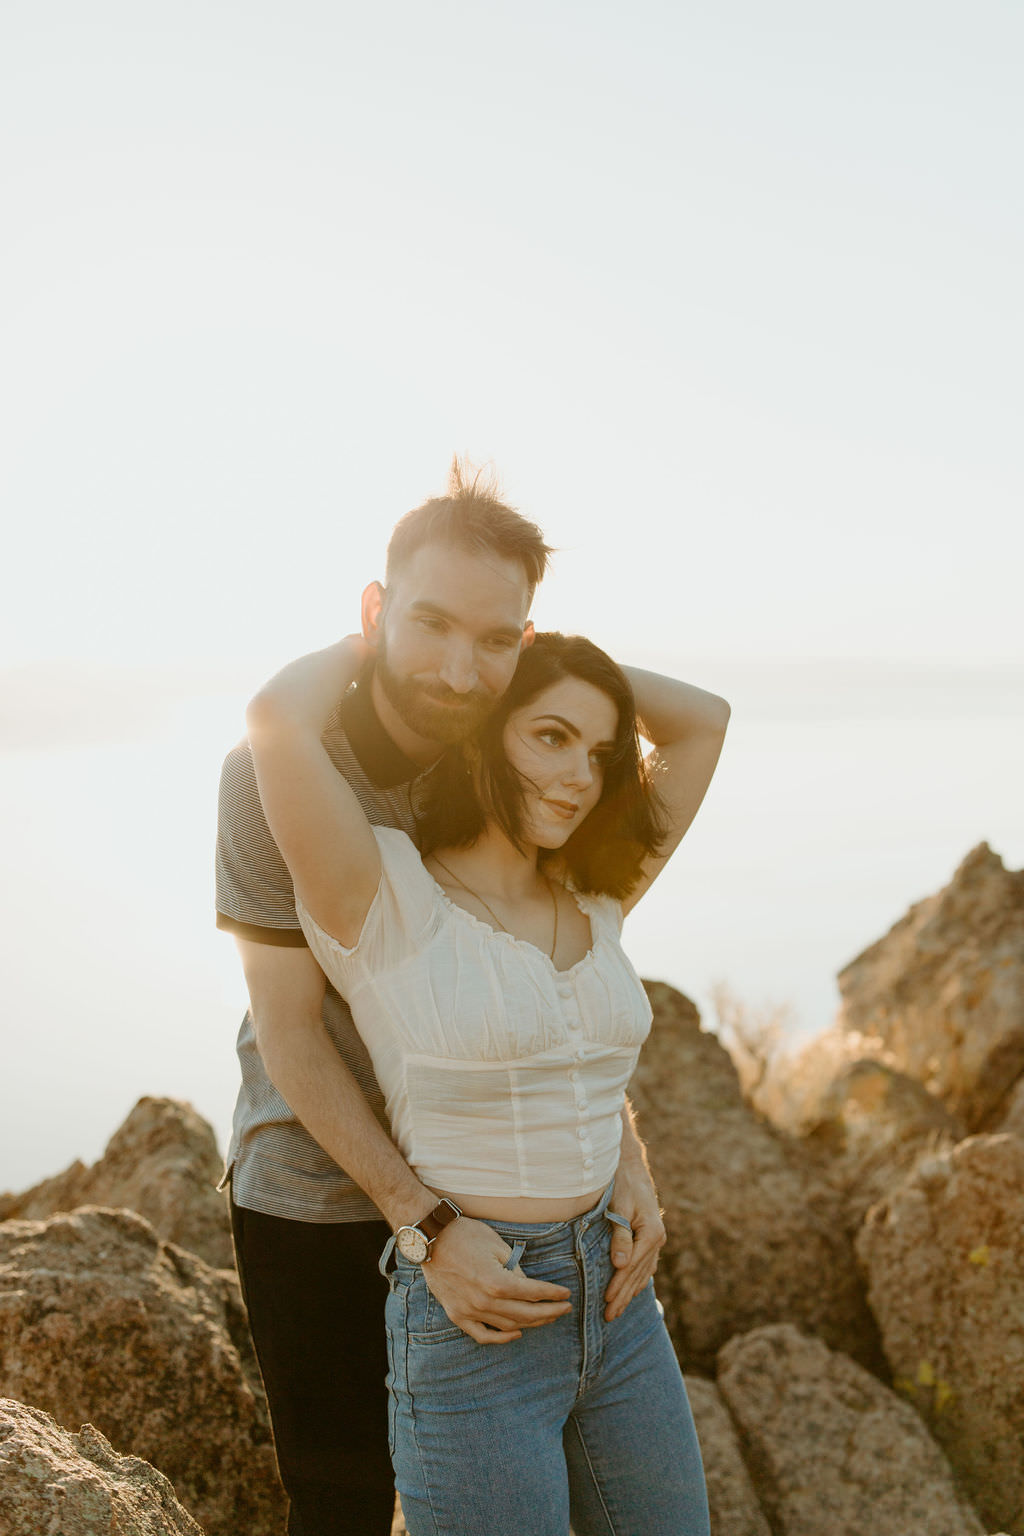 Engagement Session at Cave Rock in Lake Tahoe, California for Brandon and December.